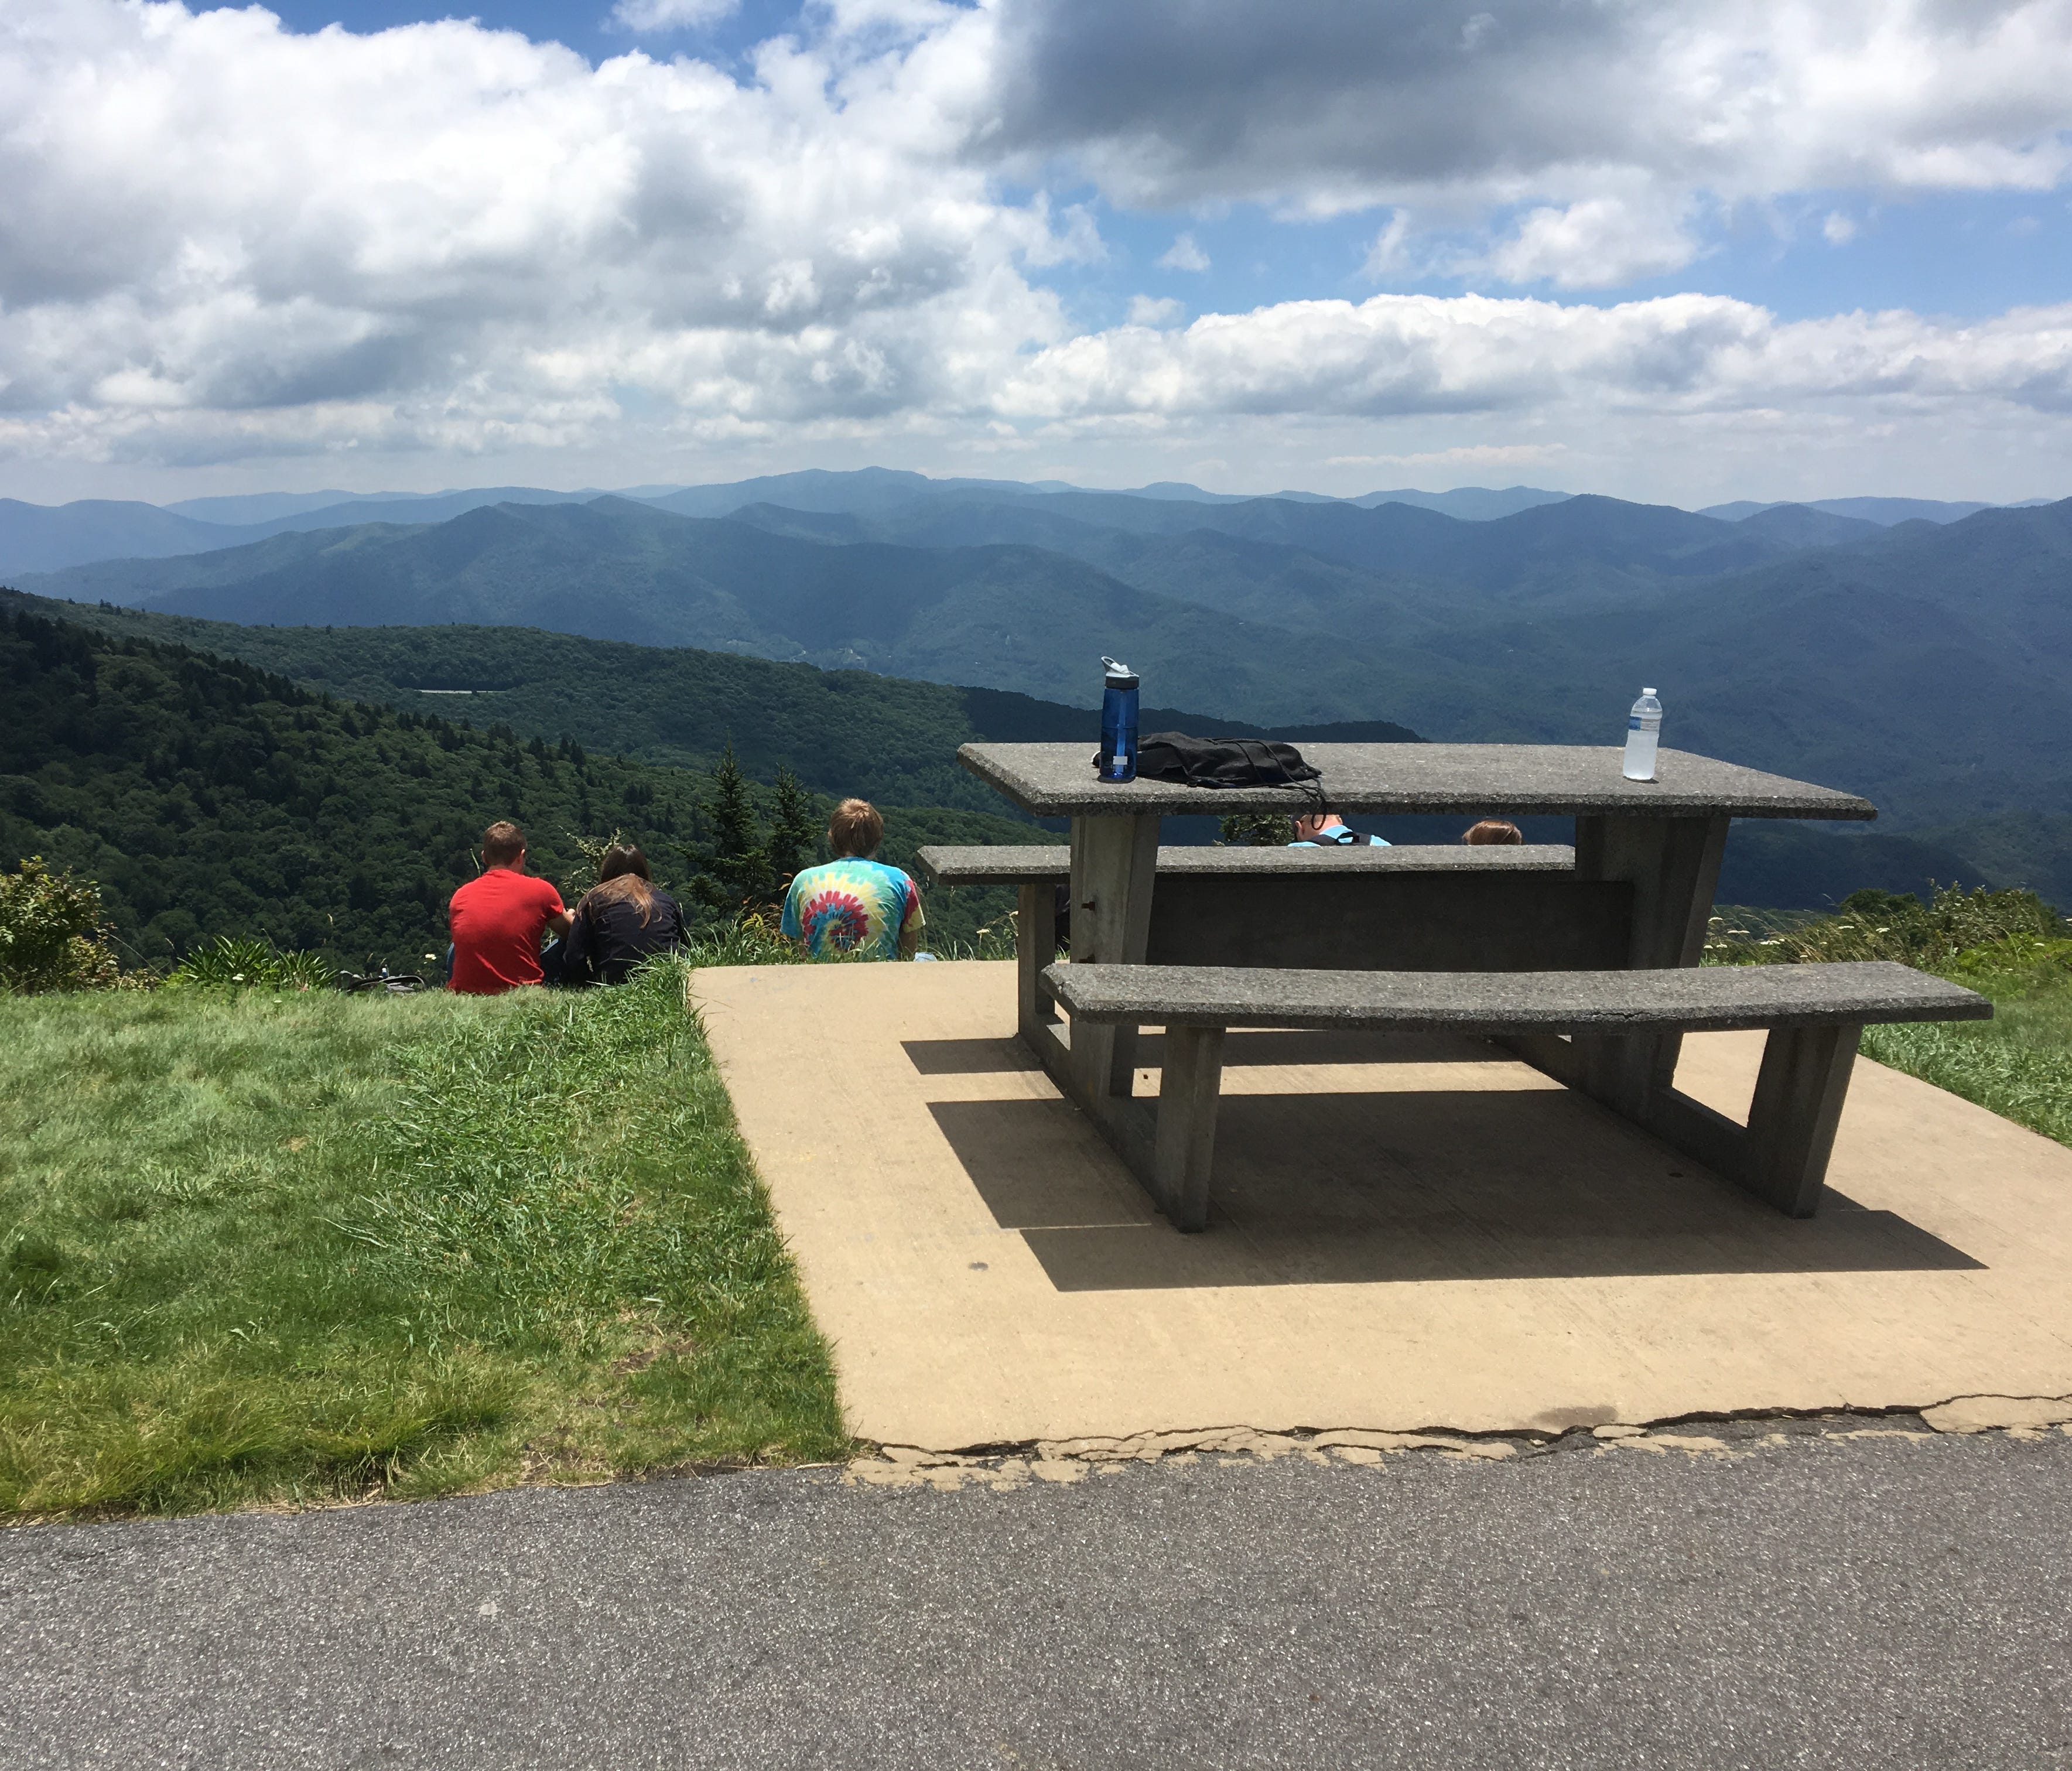 Visitors to Waterrock Knob on the Blue Ridge Parkway enjoy the views while picnicking. Waterrock Knob, at over 6,000 feet elevation, will experience solar eclipse totality for 44 seconds.